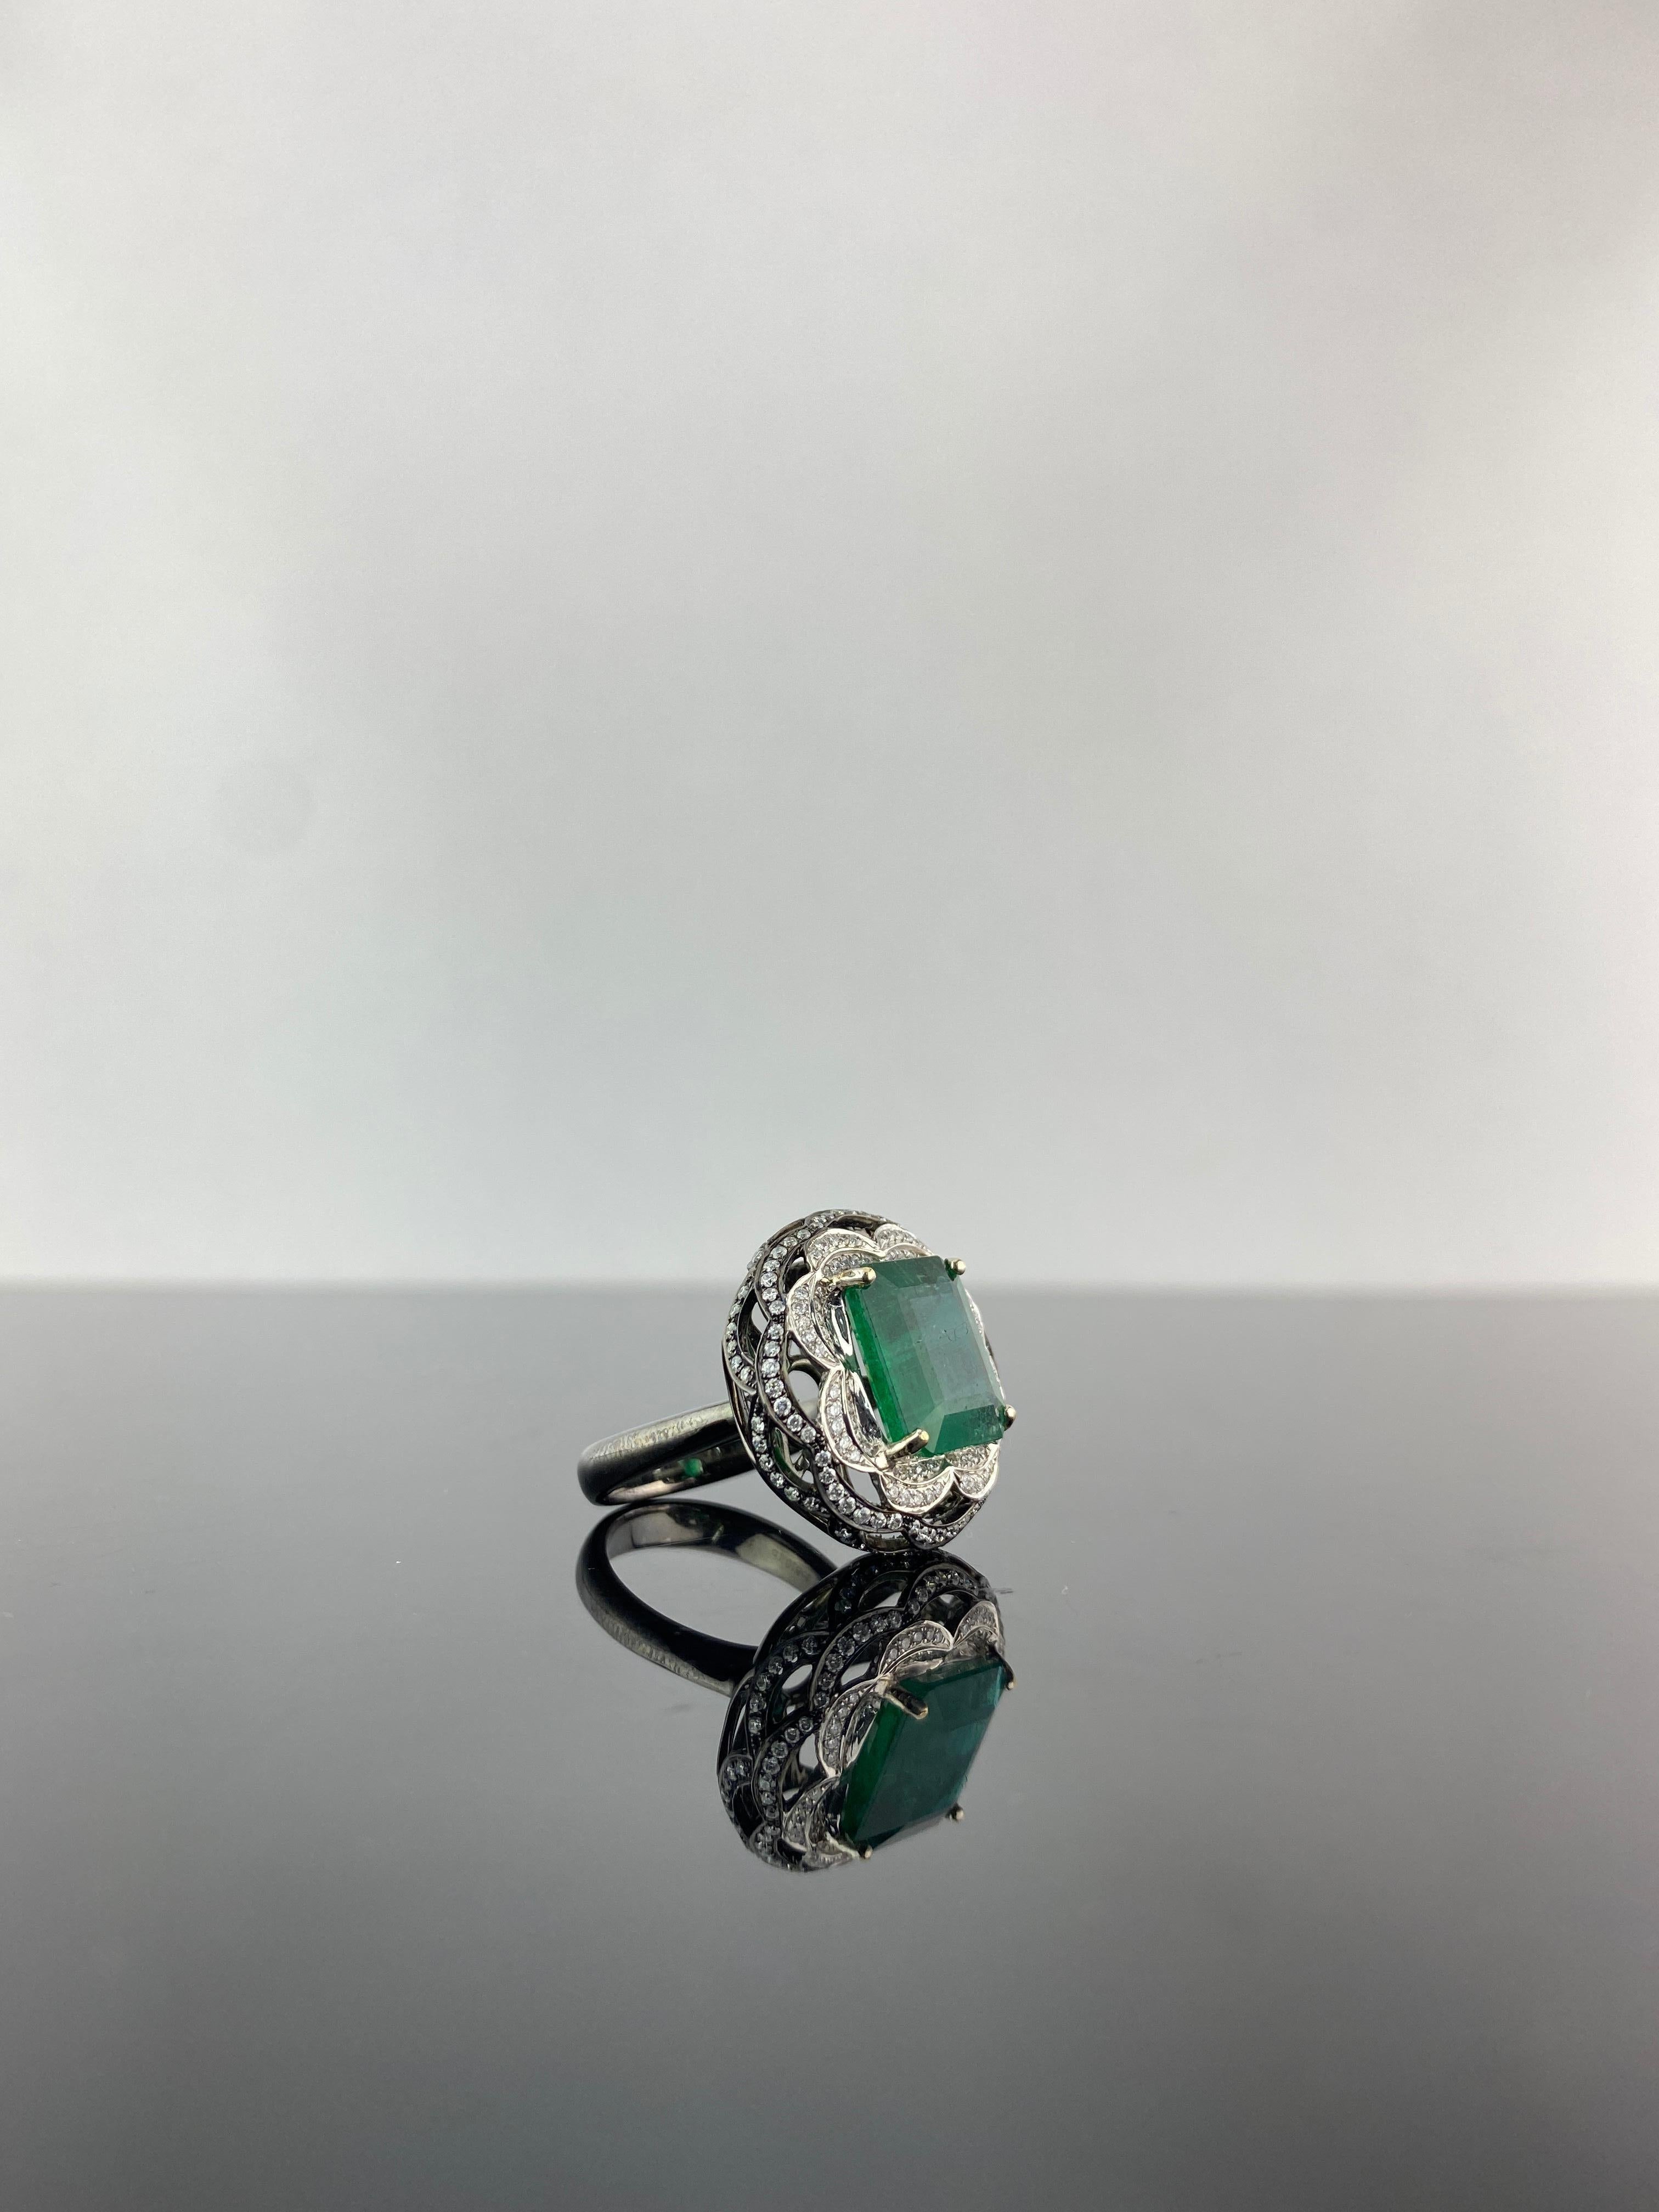 A very unique 18K Black Rhodium and White Gold cocktail ring, with a natural 6.54 carat natural Zambian Emerald center stone and White Diamonds. The Emerald is of high quality, ideal vivid green color and great luster. The ring is currently sized at